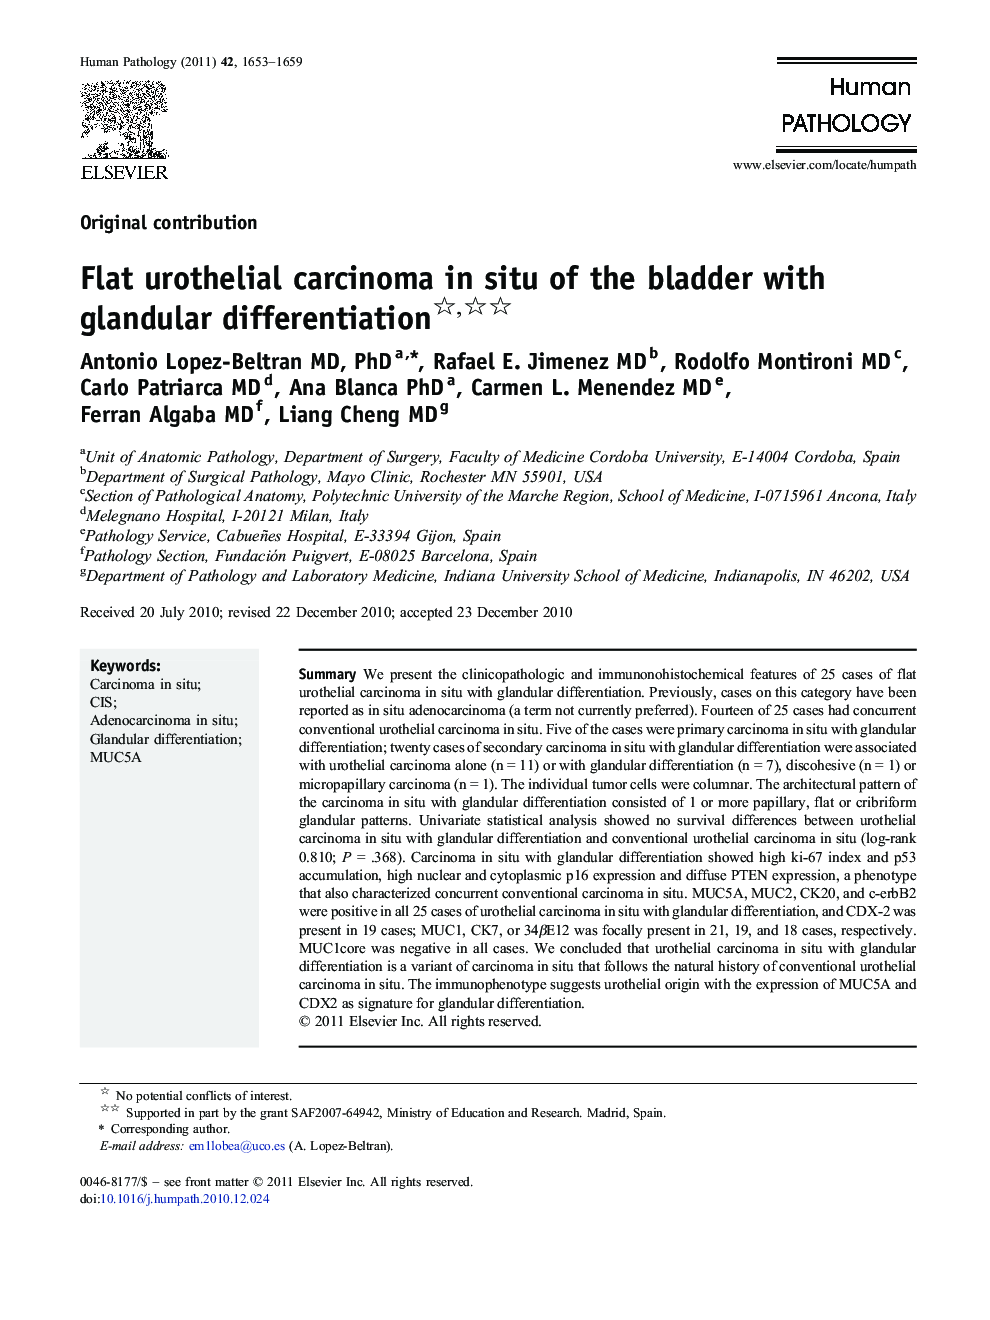 Flat urothelial carcinoma in situ of the bladder with glandular differentiation 